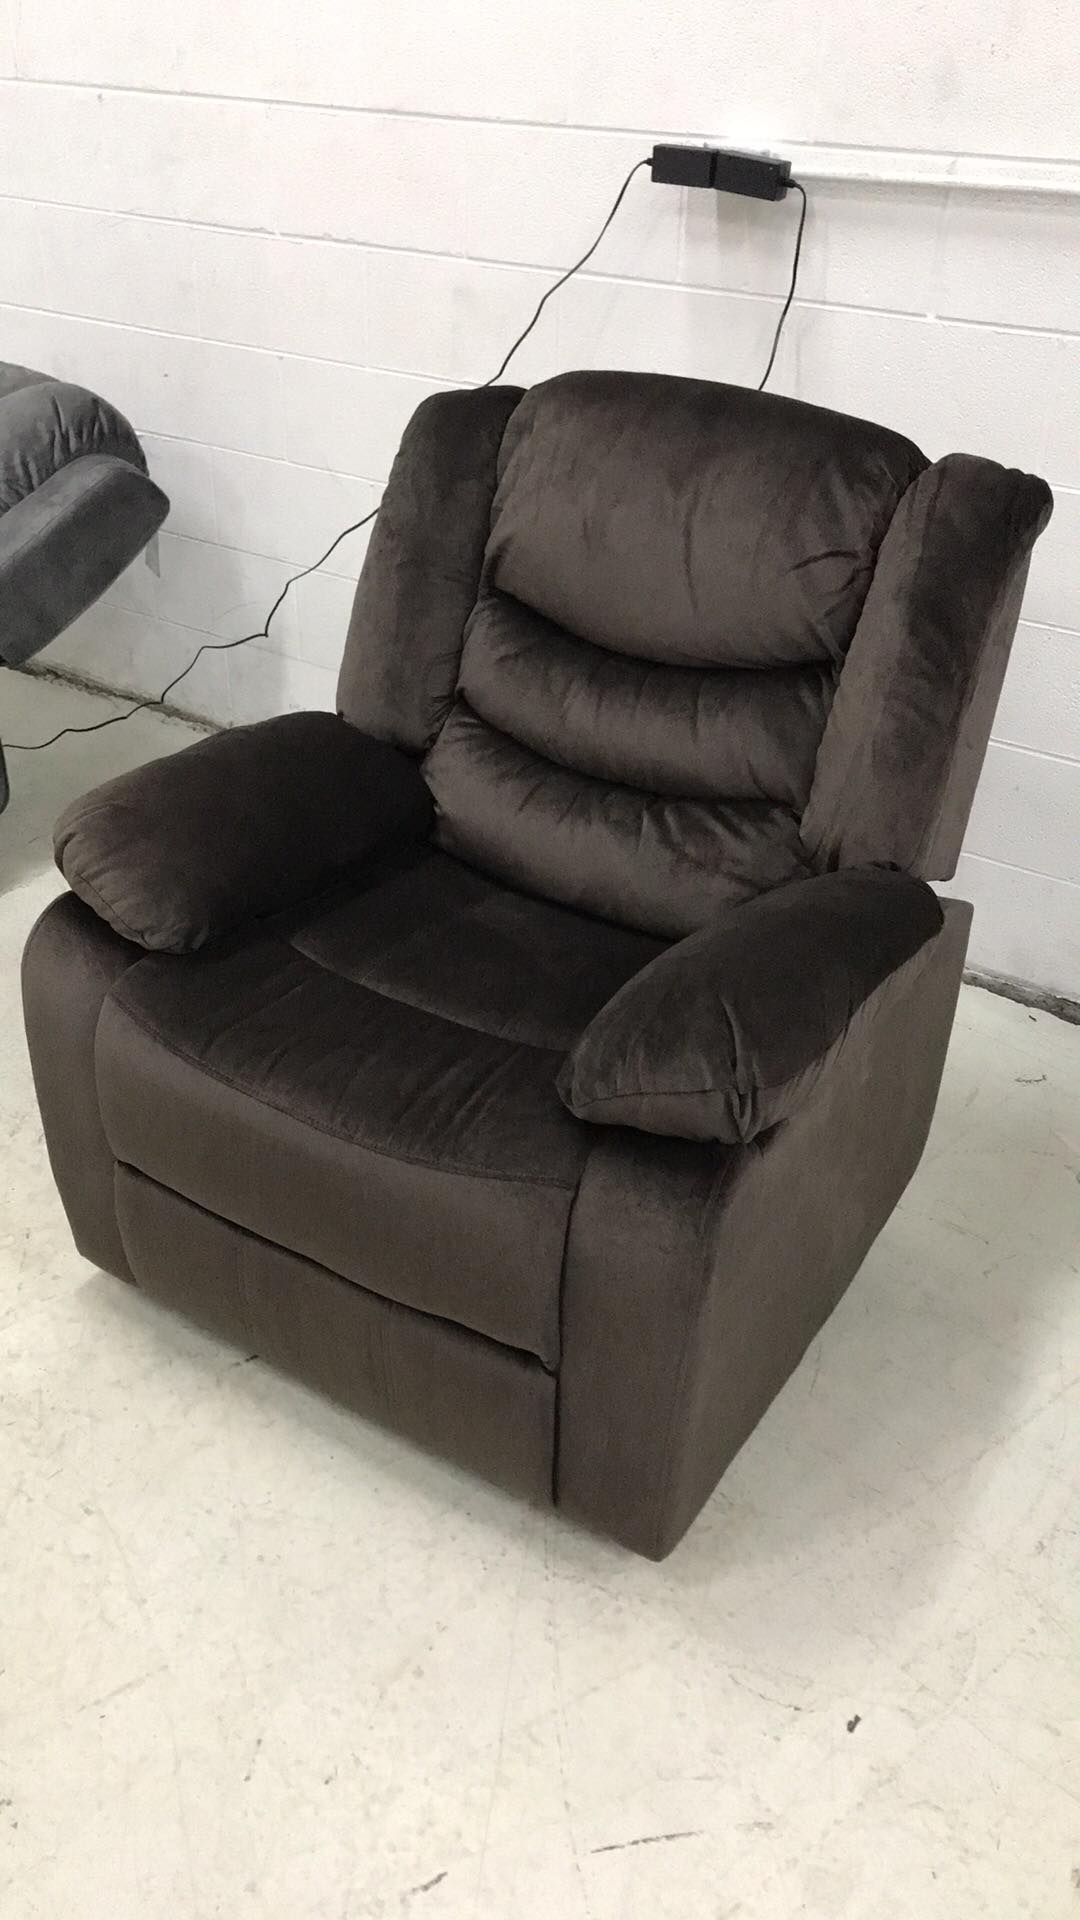 WEEKLY or MONTHLY. Urbino Oyster POWER Chaise Recliner